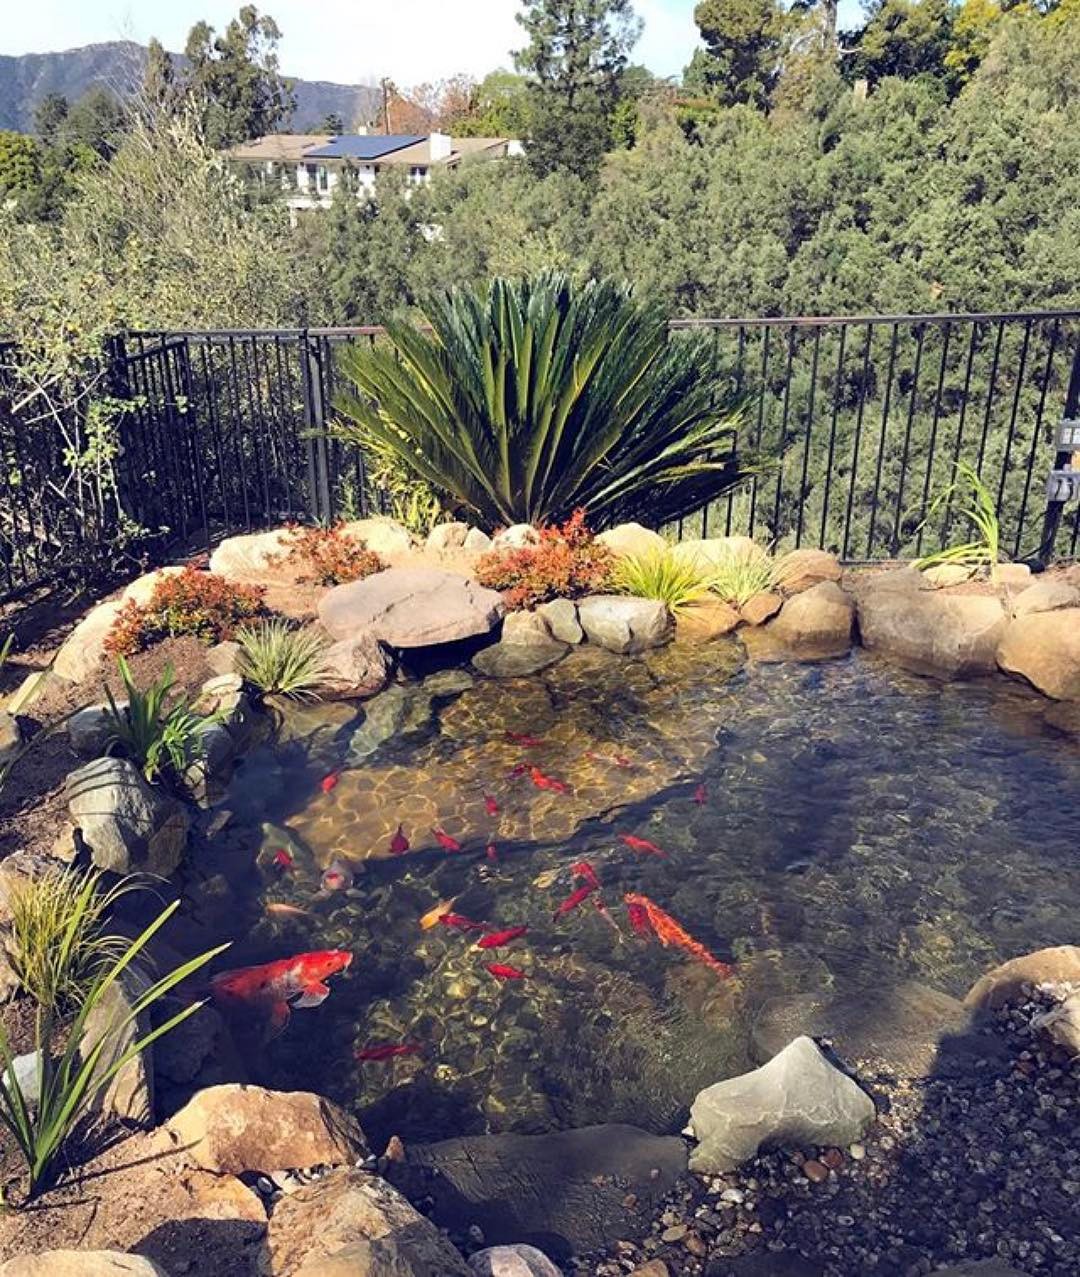 Backyard koi pond surrounded by plants. Photo by Instagram user @proponds_west